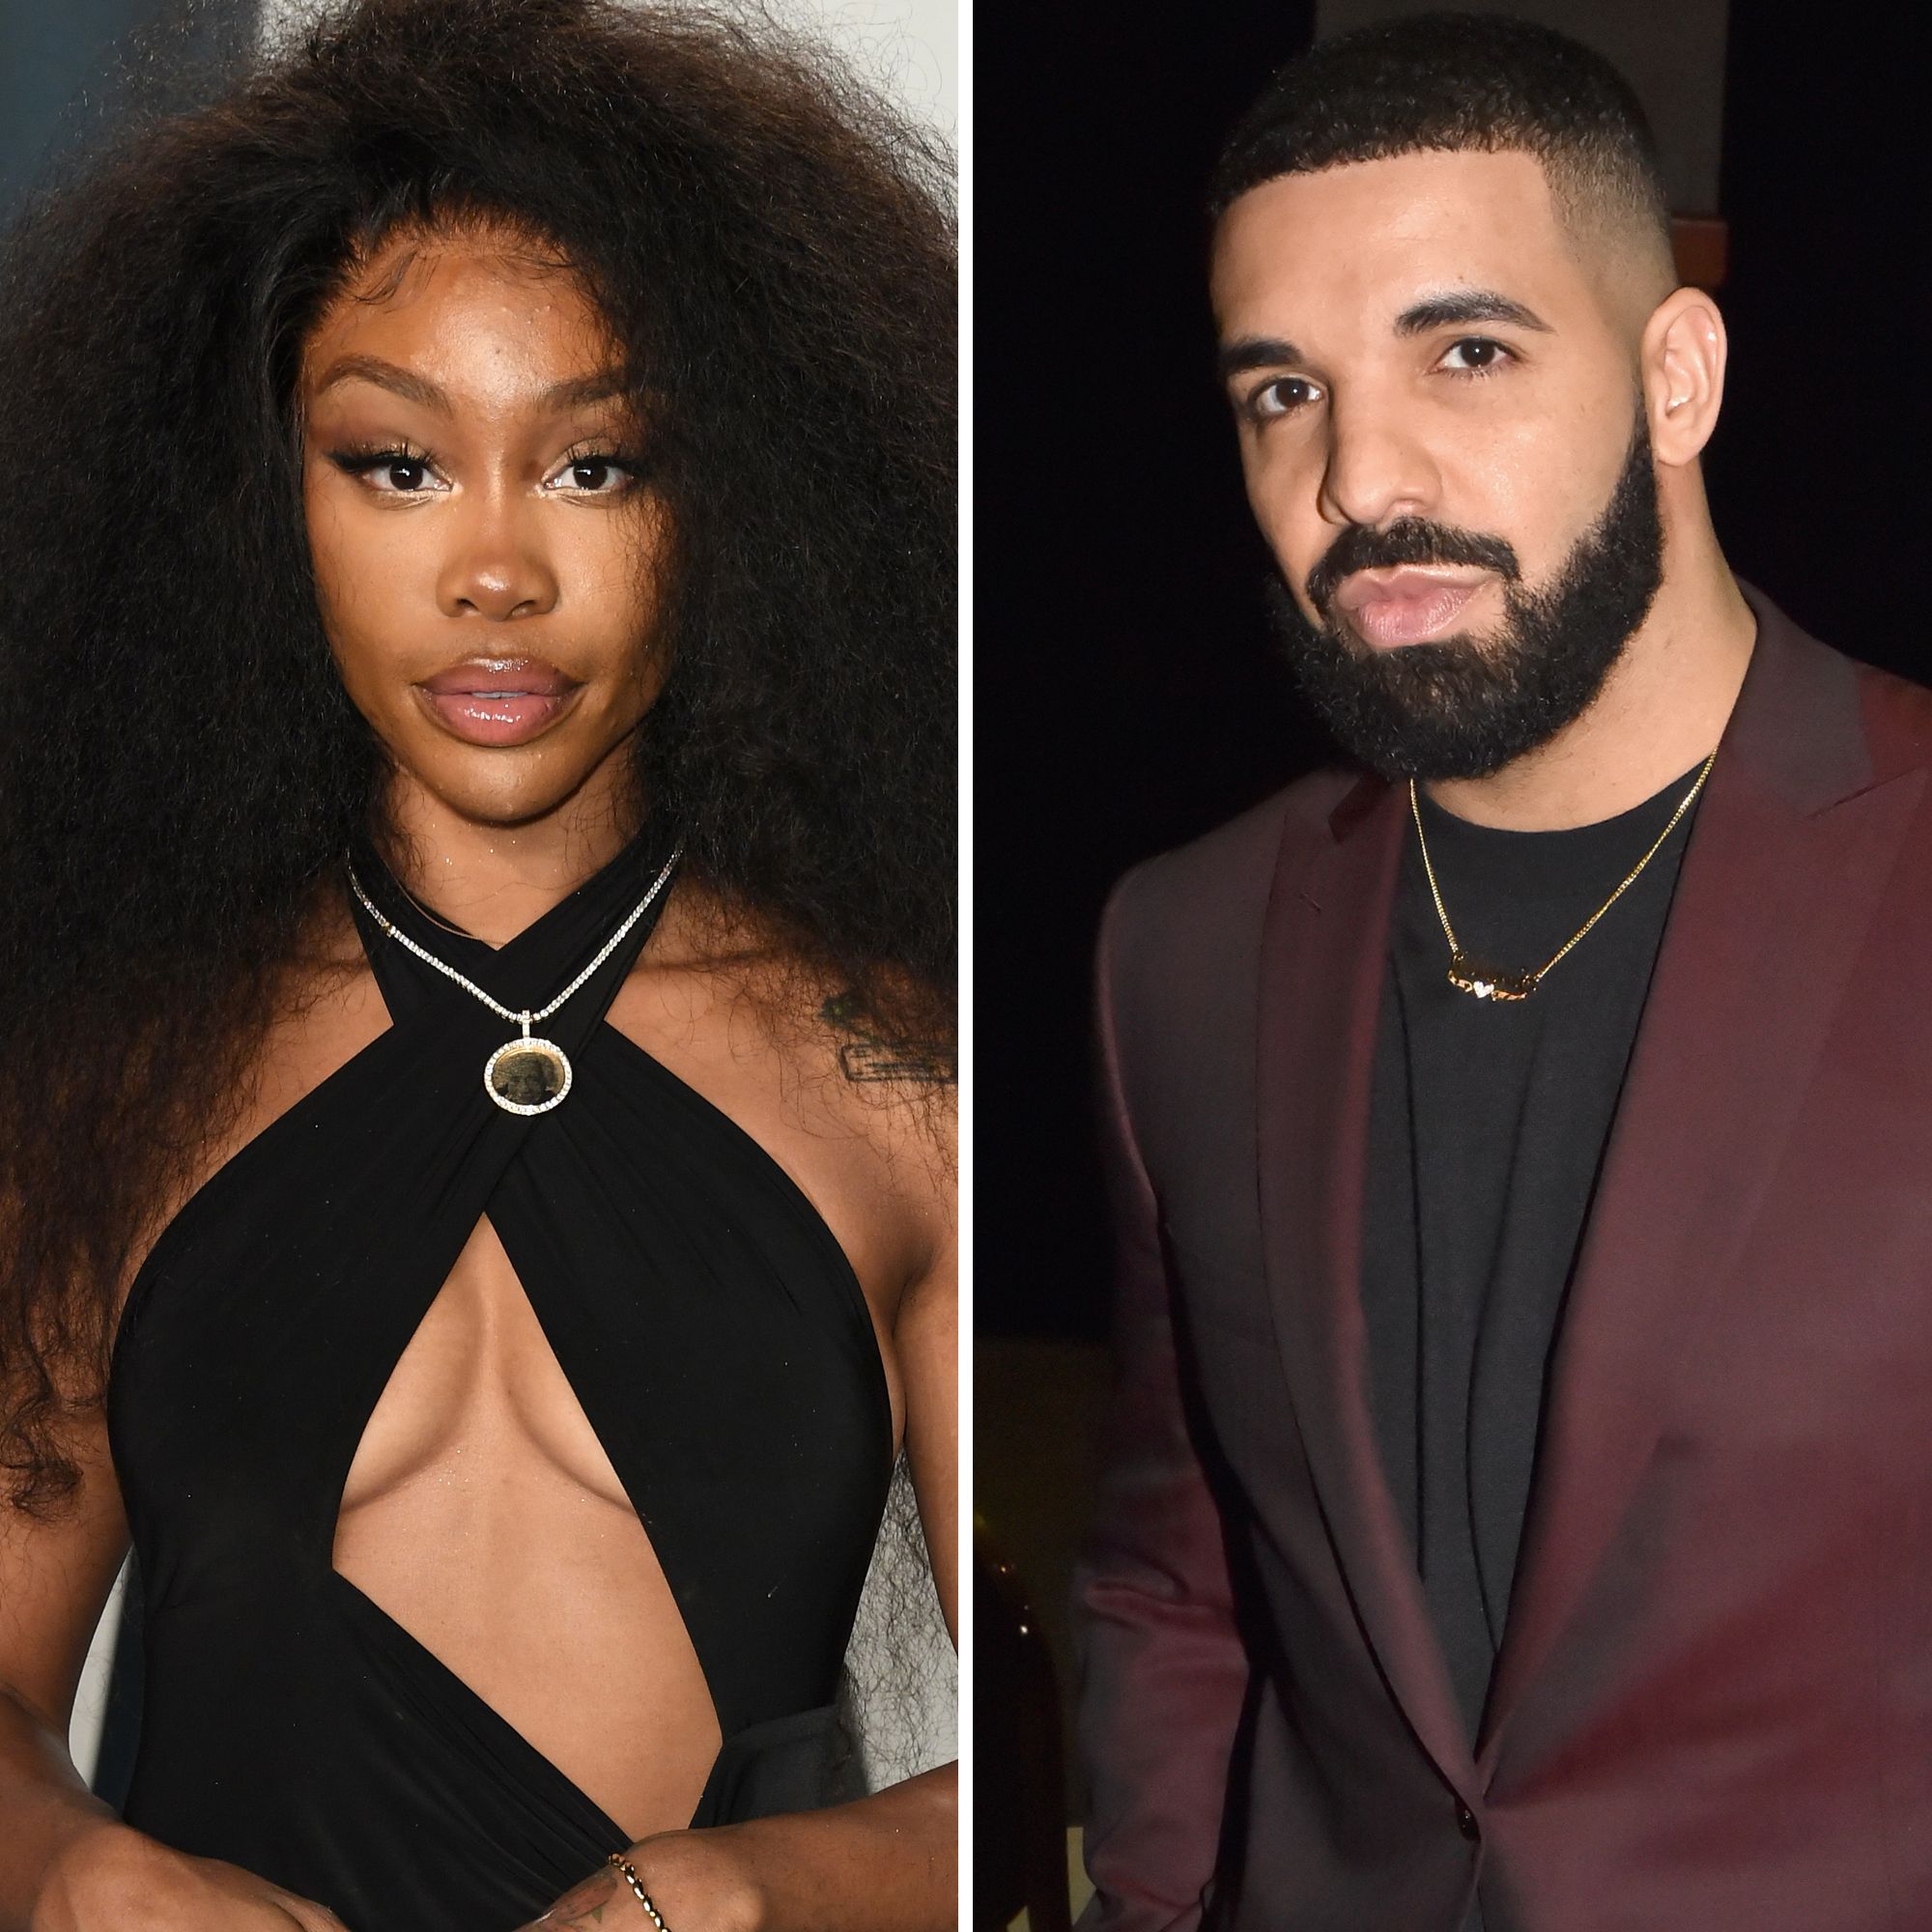 Sza Confirmed A Completely Innocent Romance With Drake